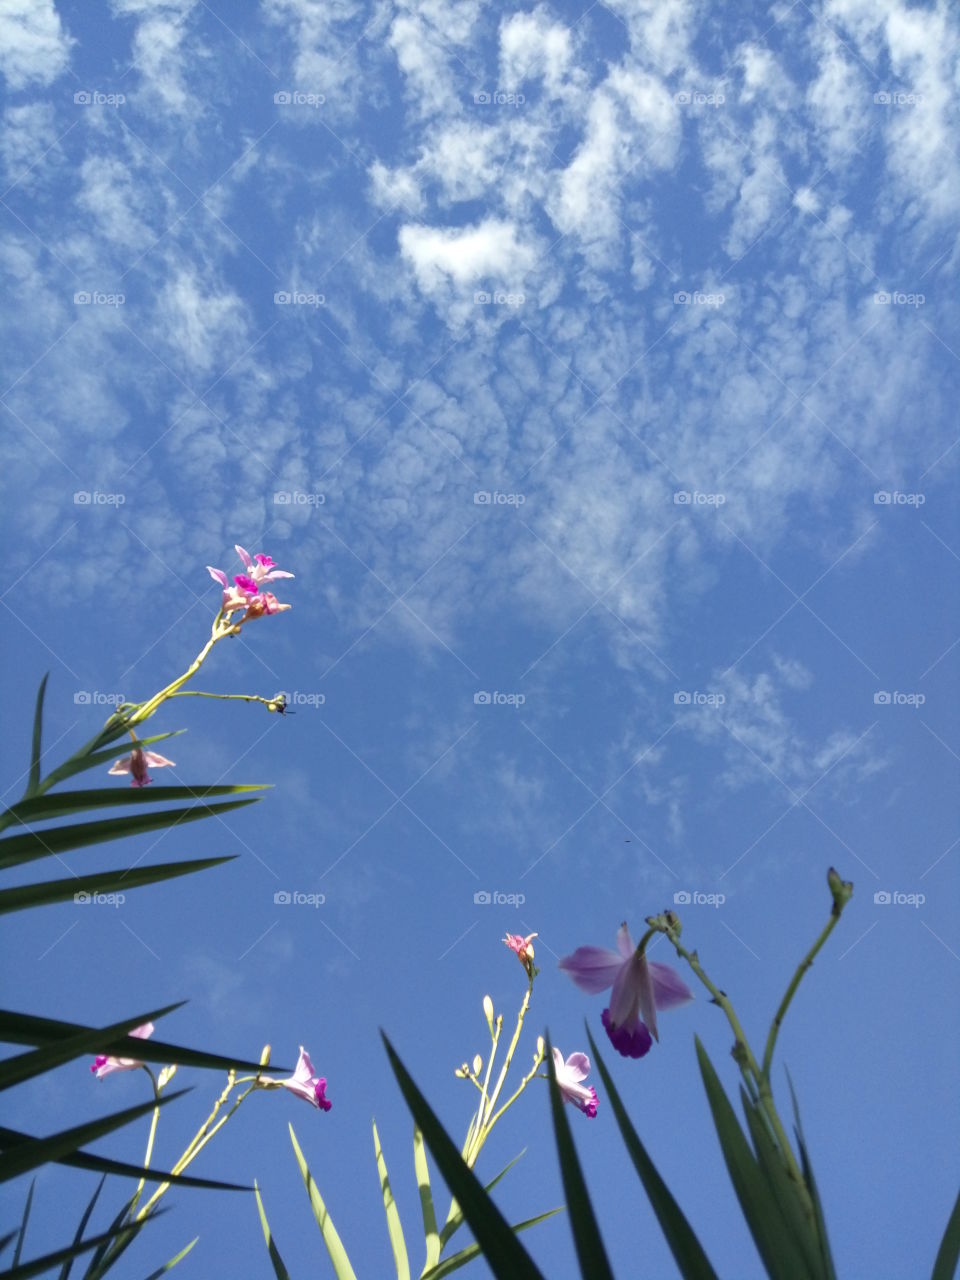 Sky and Flower